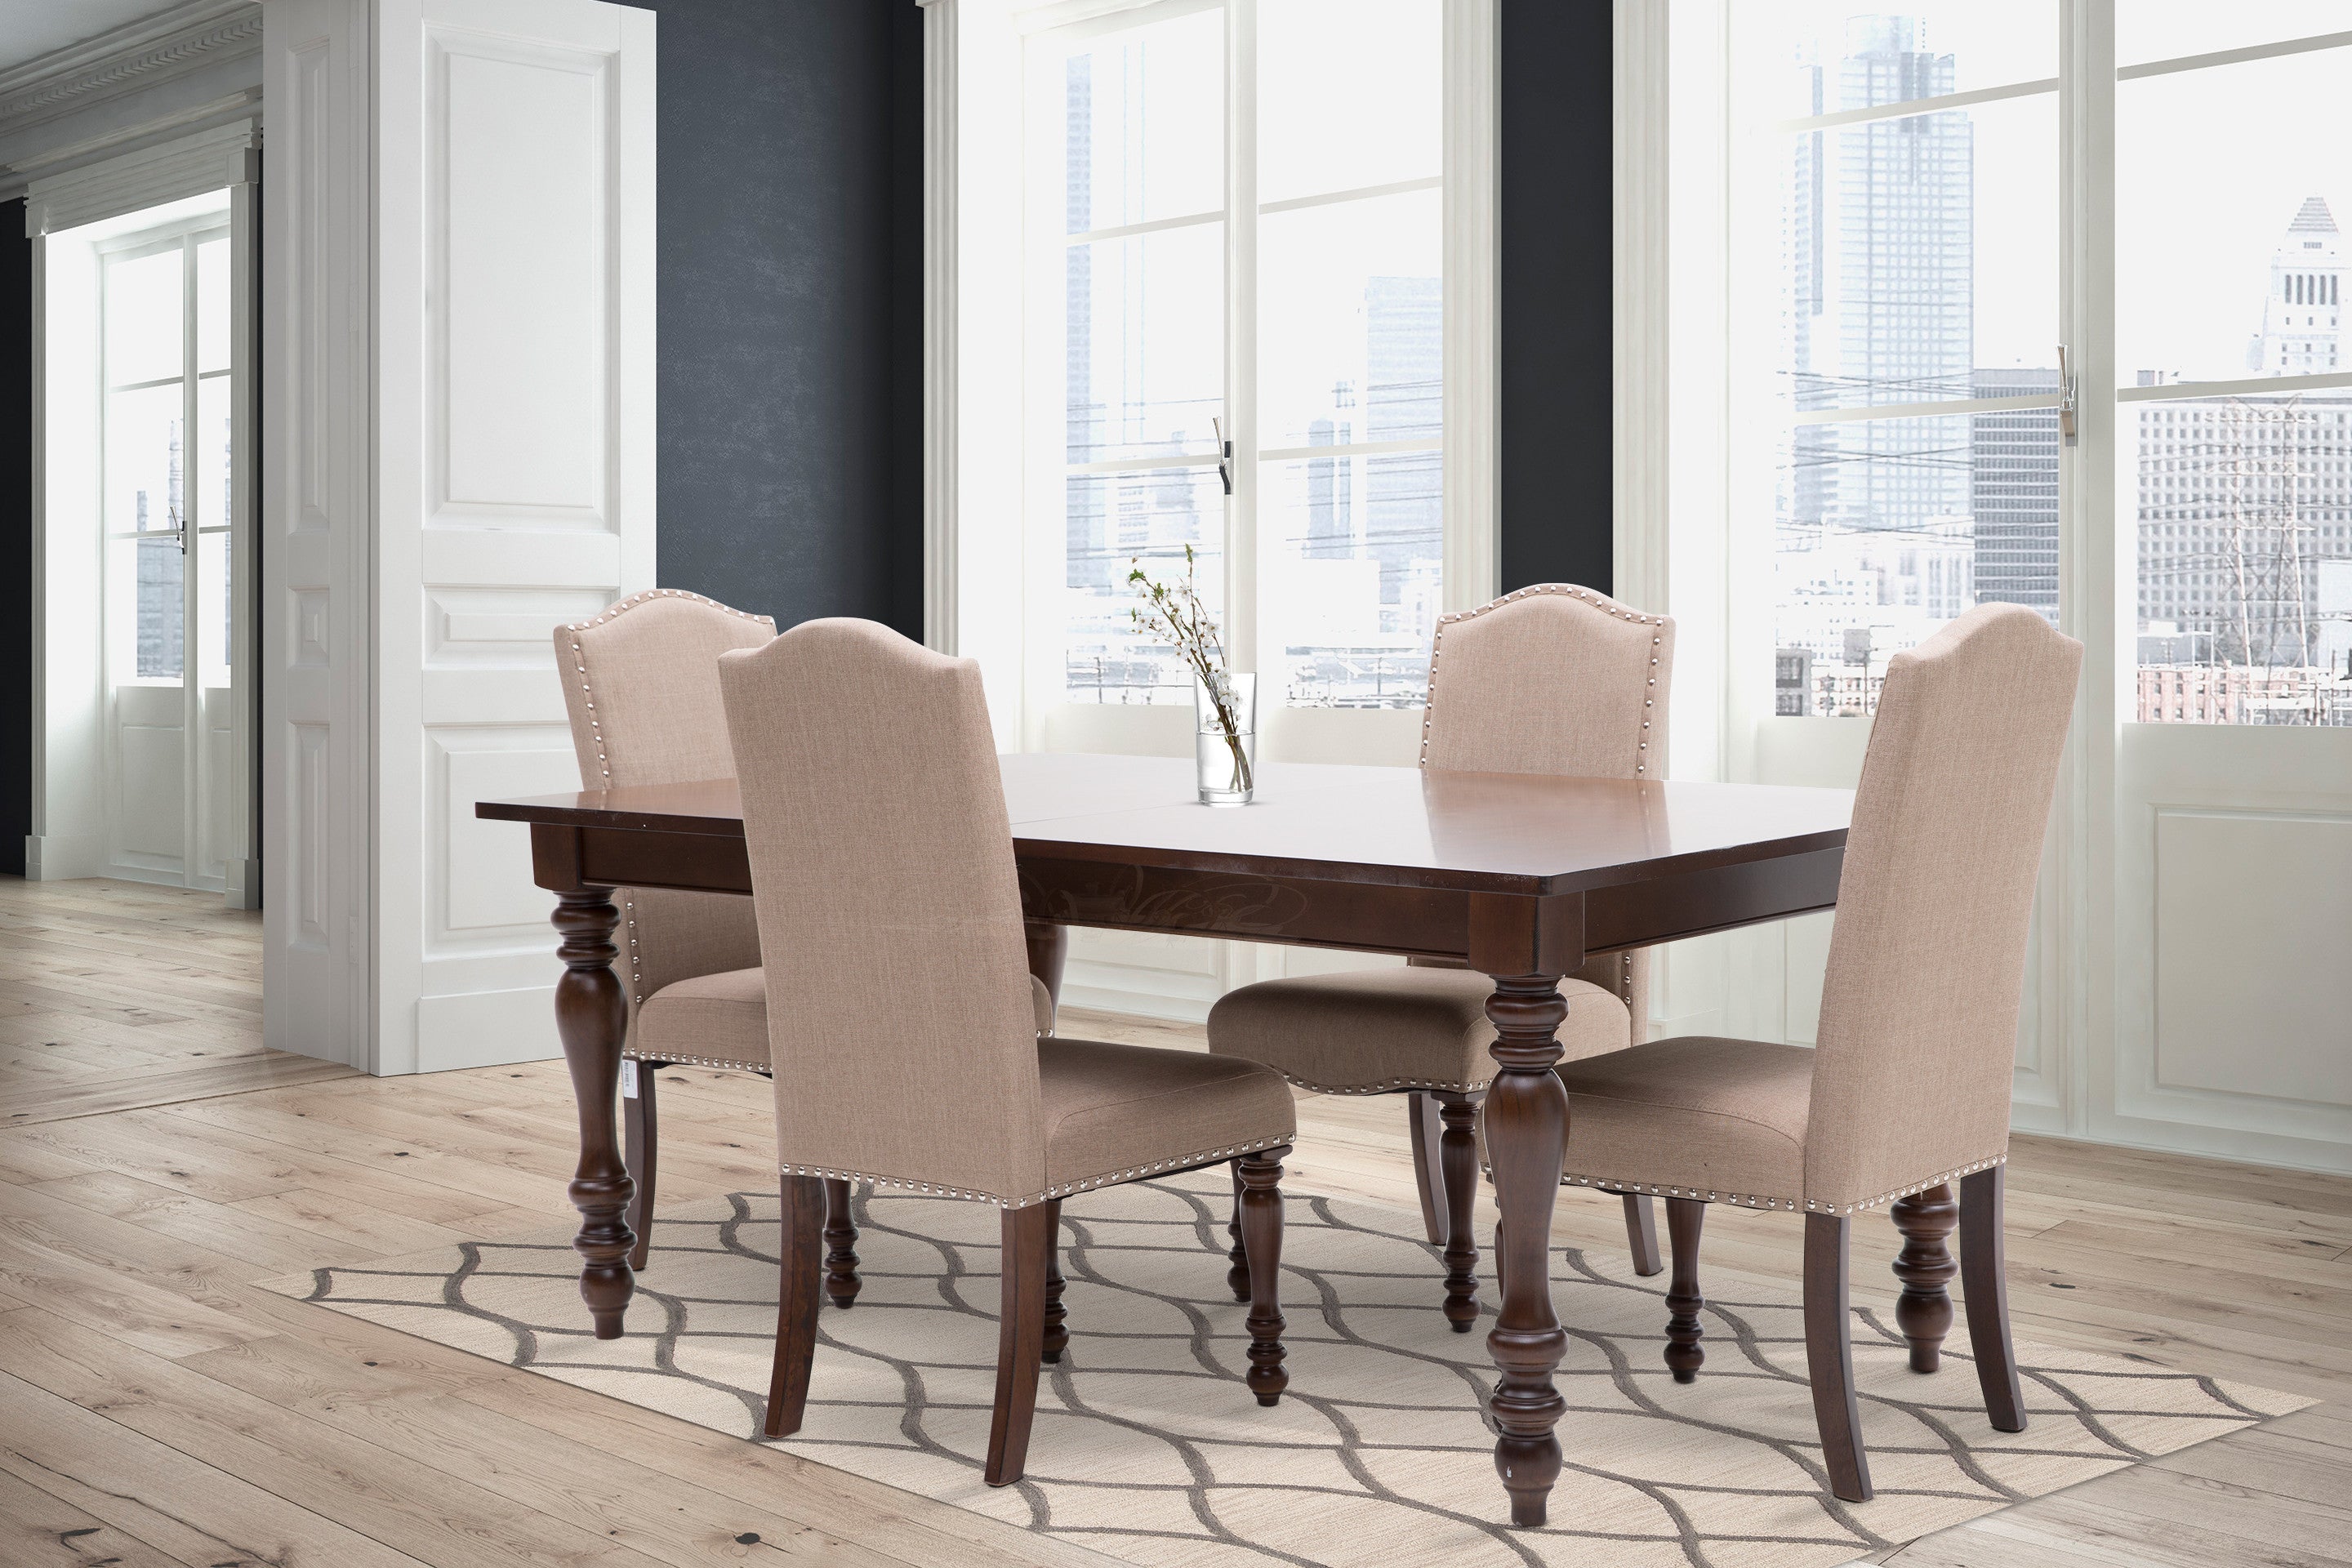 Used Dining Room Sets For Sale In Nj